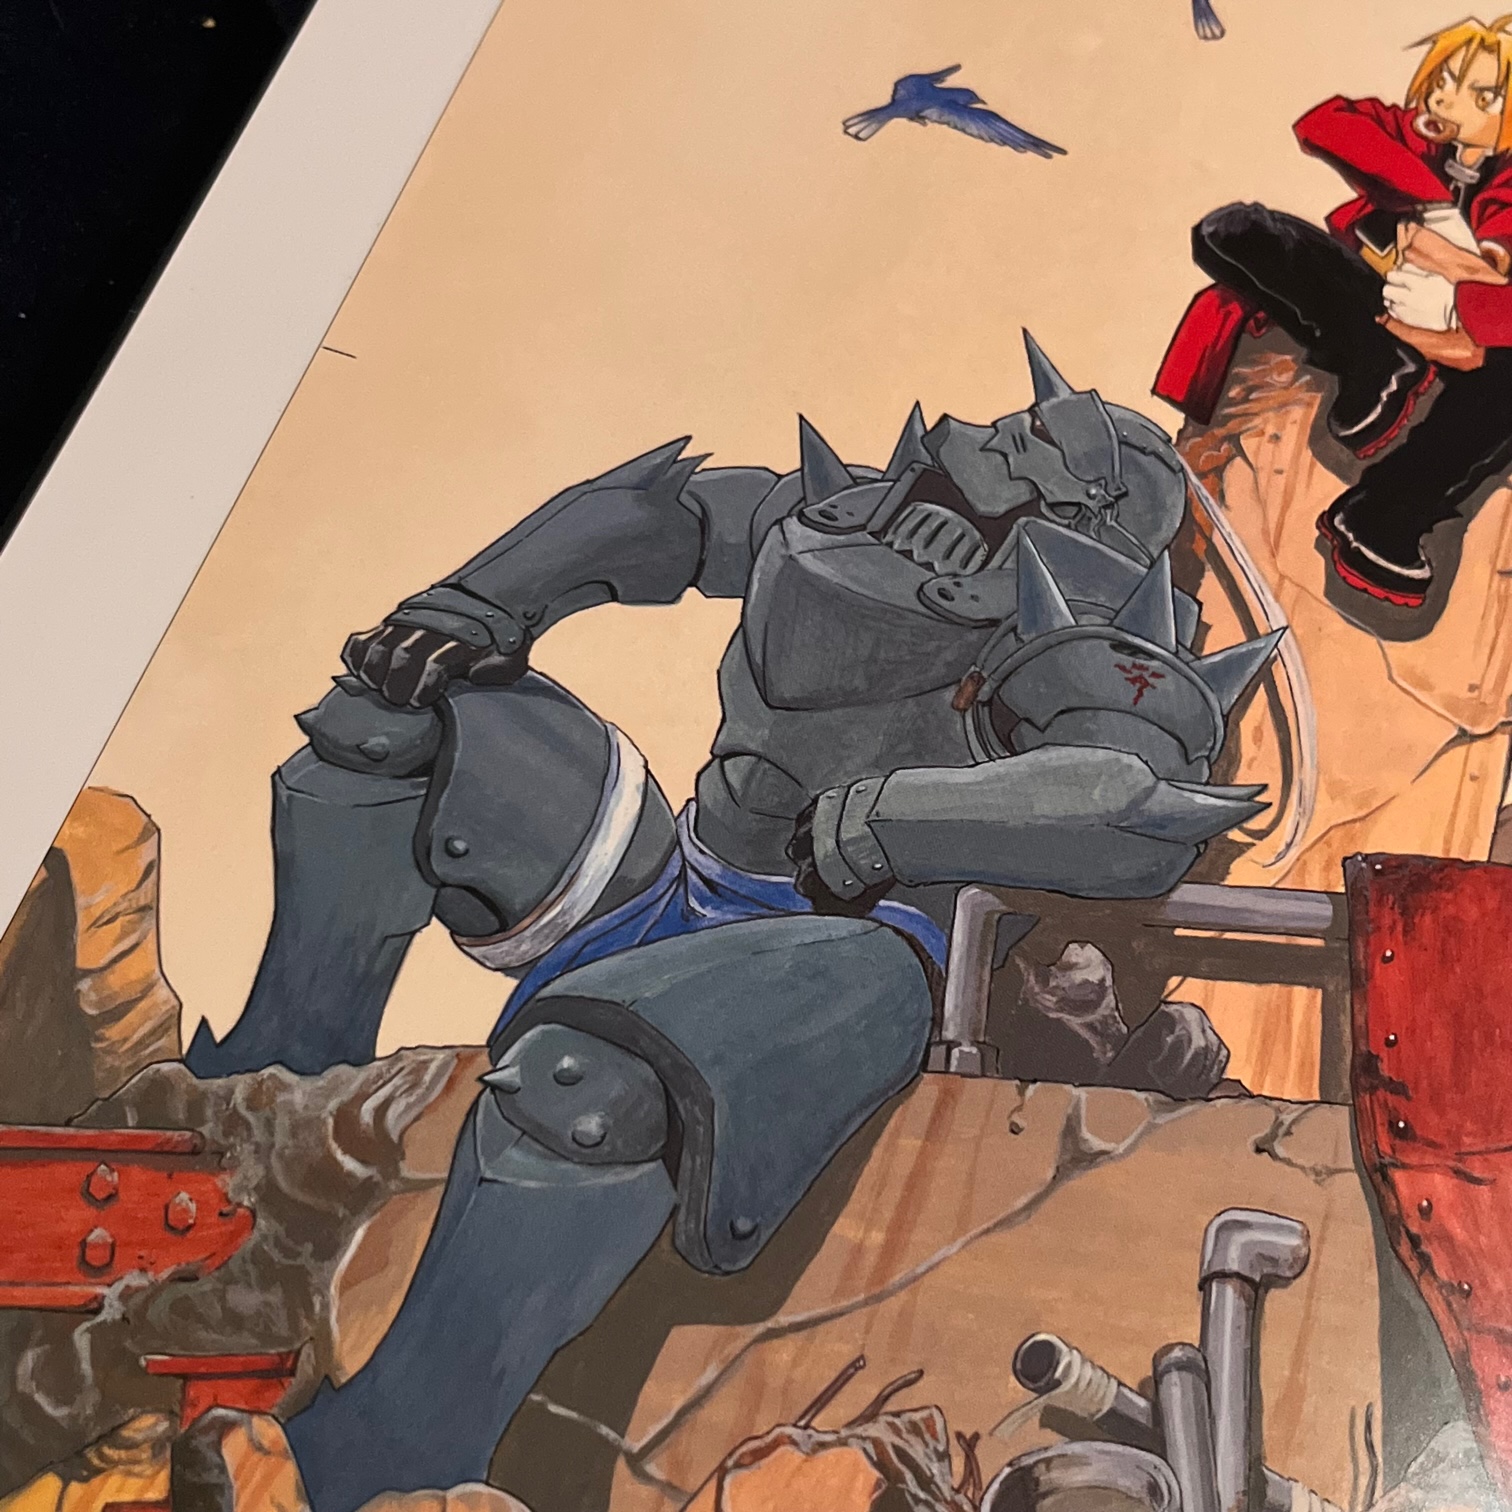 alphonse in page of artbook